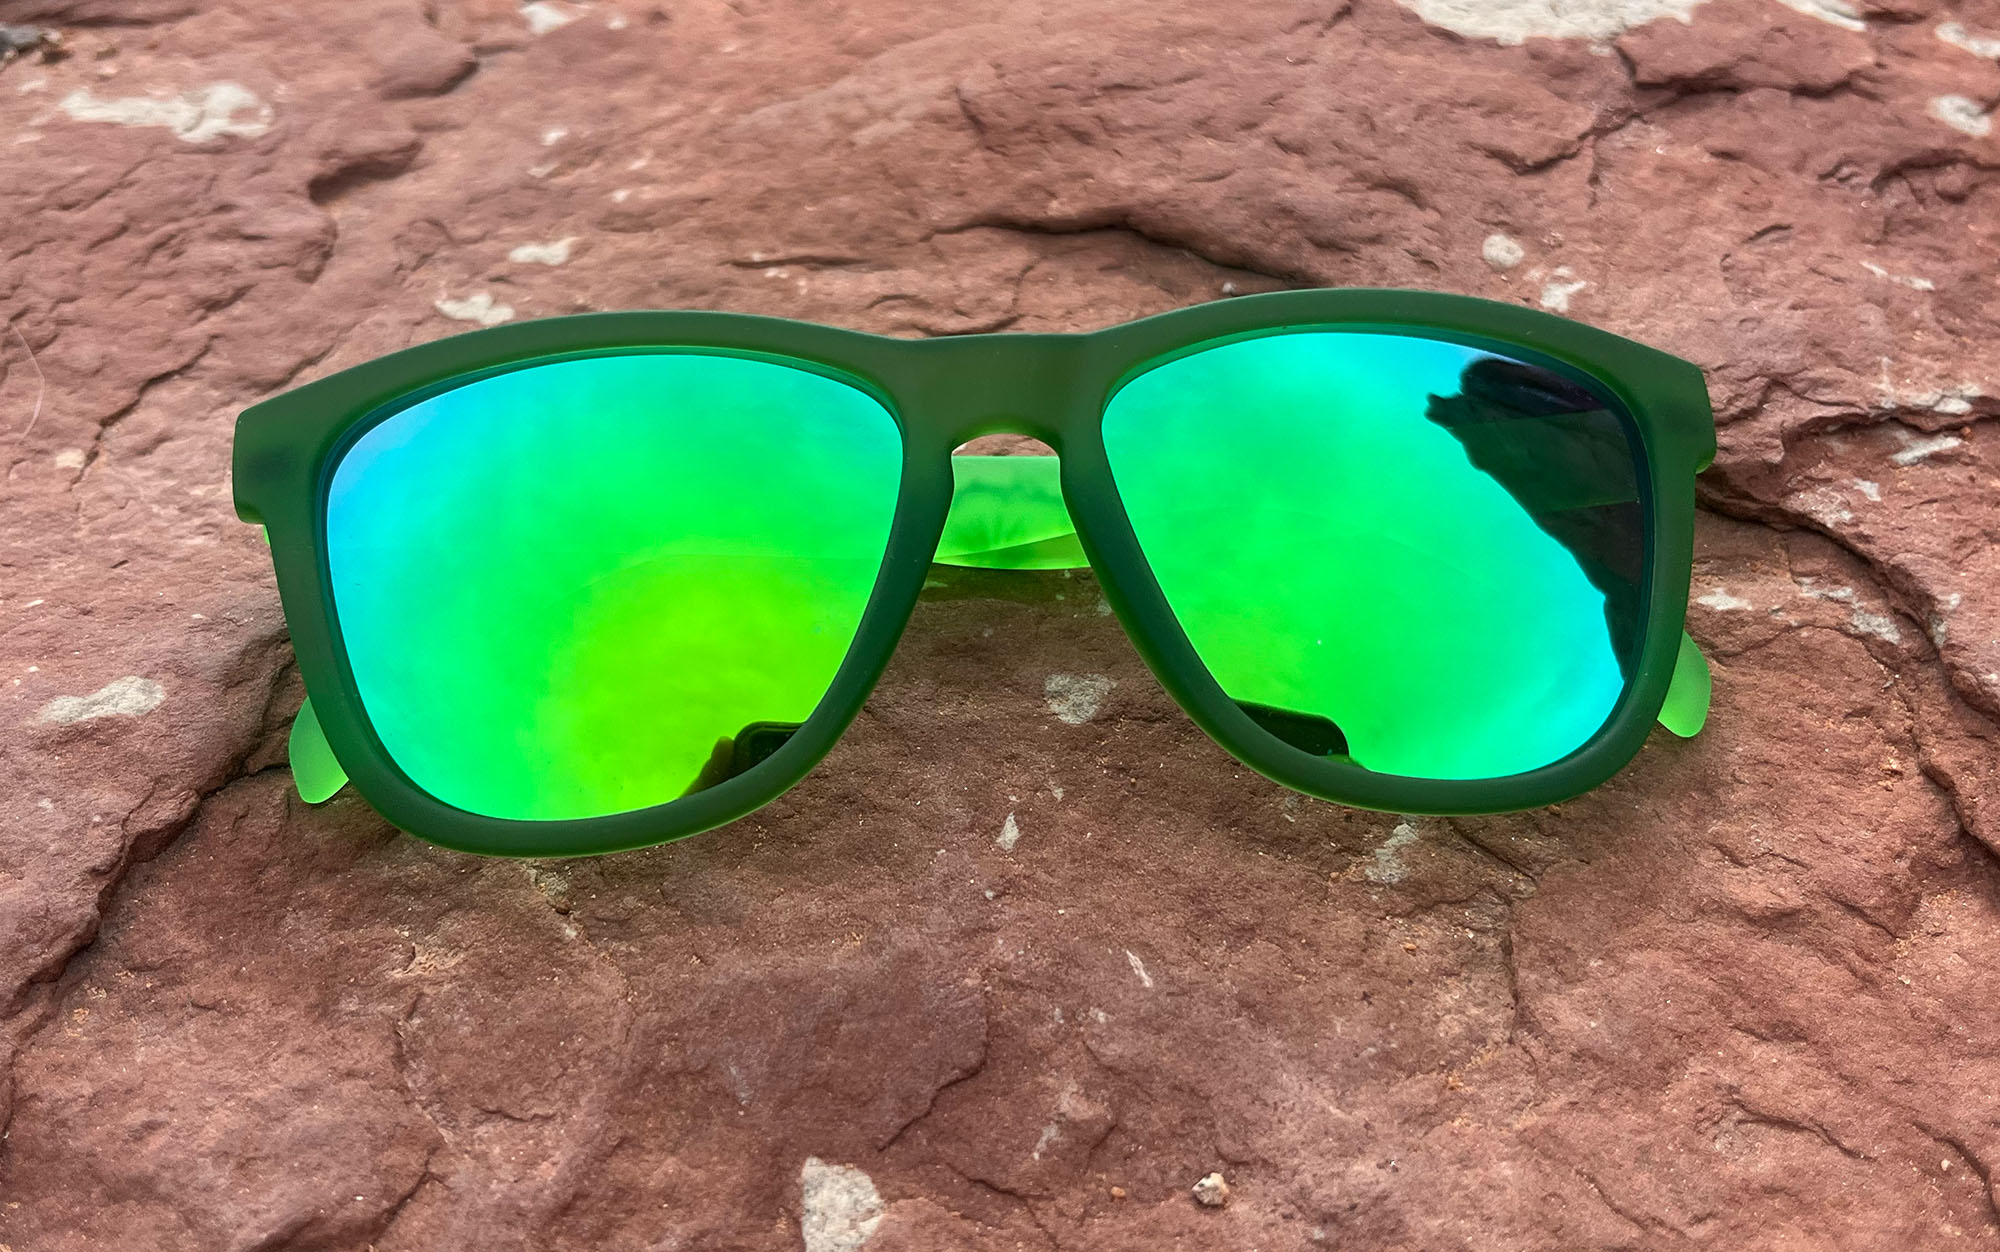 The Goodr Everglades are the best budget hiking sunglasses.